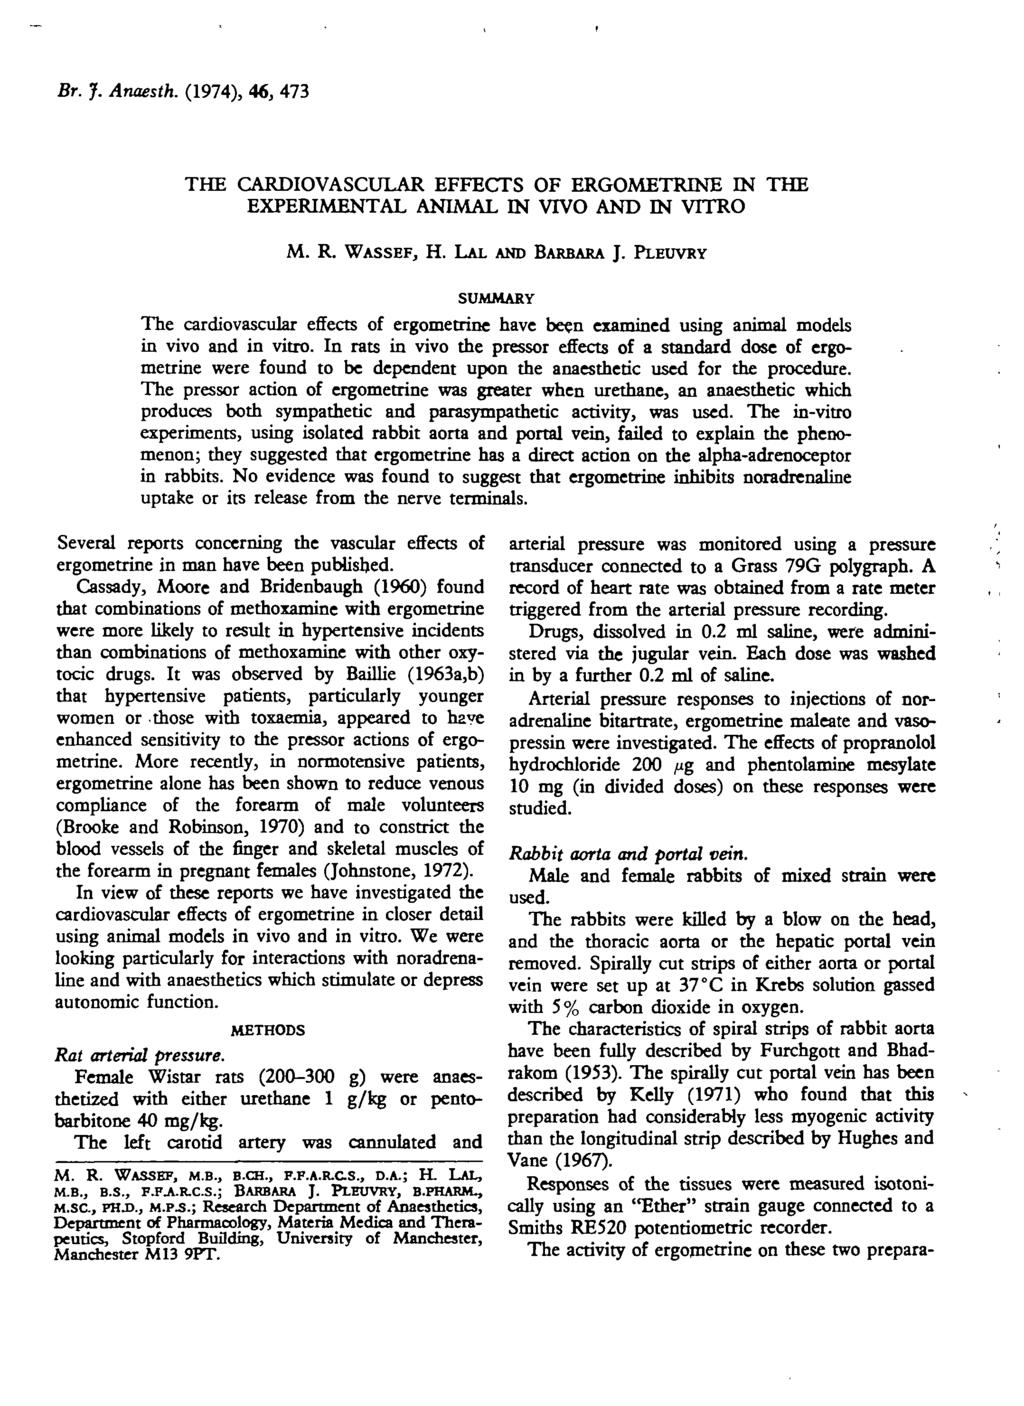 Br. J. Anaesth. (1974), 46, 473 THE CARDIOVASCULAR EFFECTS OF ERGOMETRINE IN THE EXPERIMENTAL ANIMAL IN VIVO AND IN VITRO M. R. WASSEF, H. LAL AND BARBARA J.